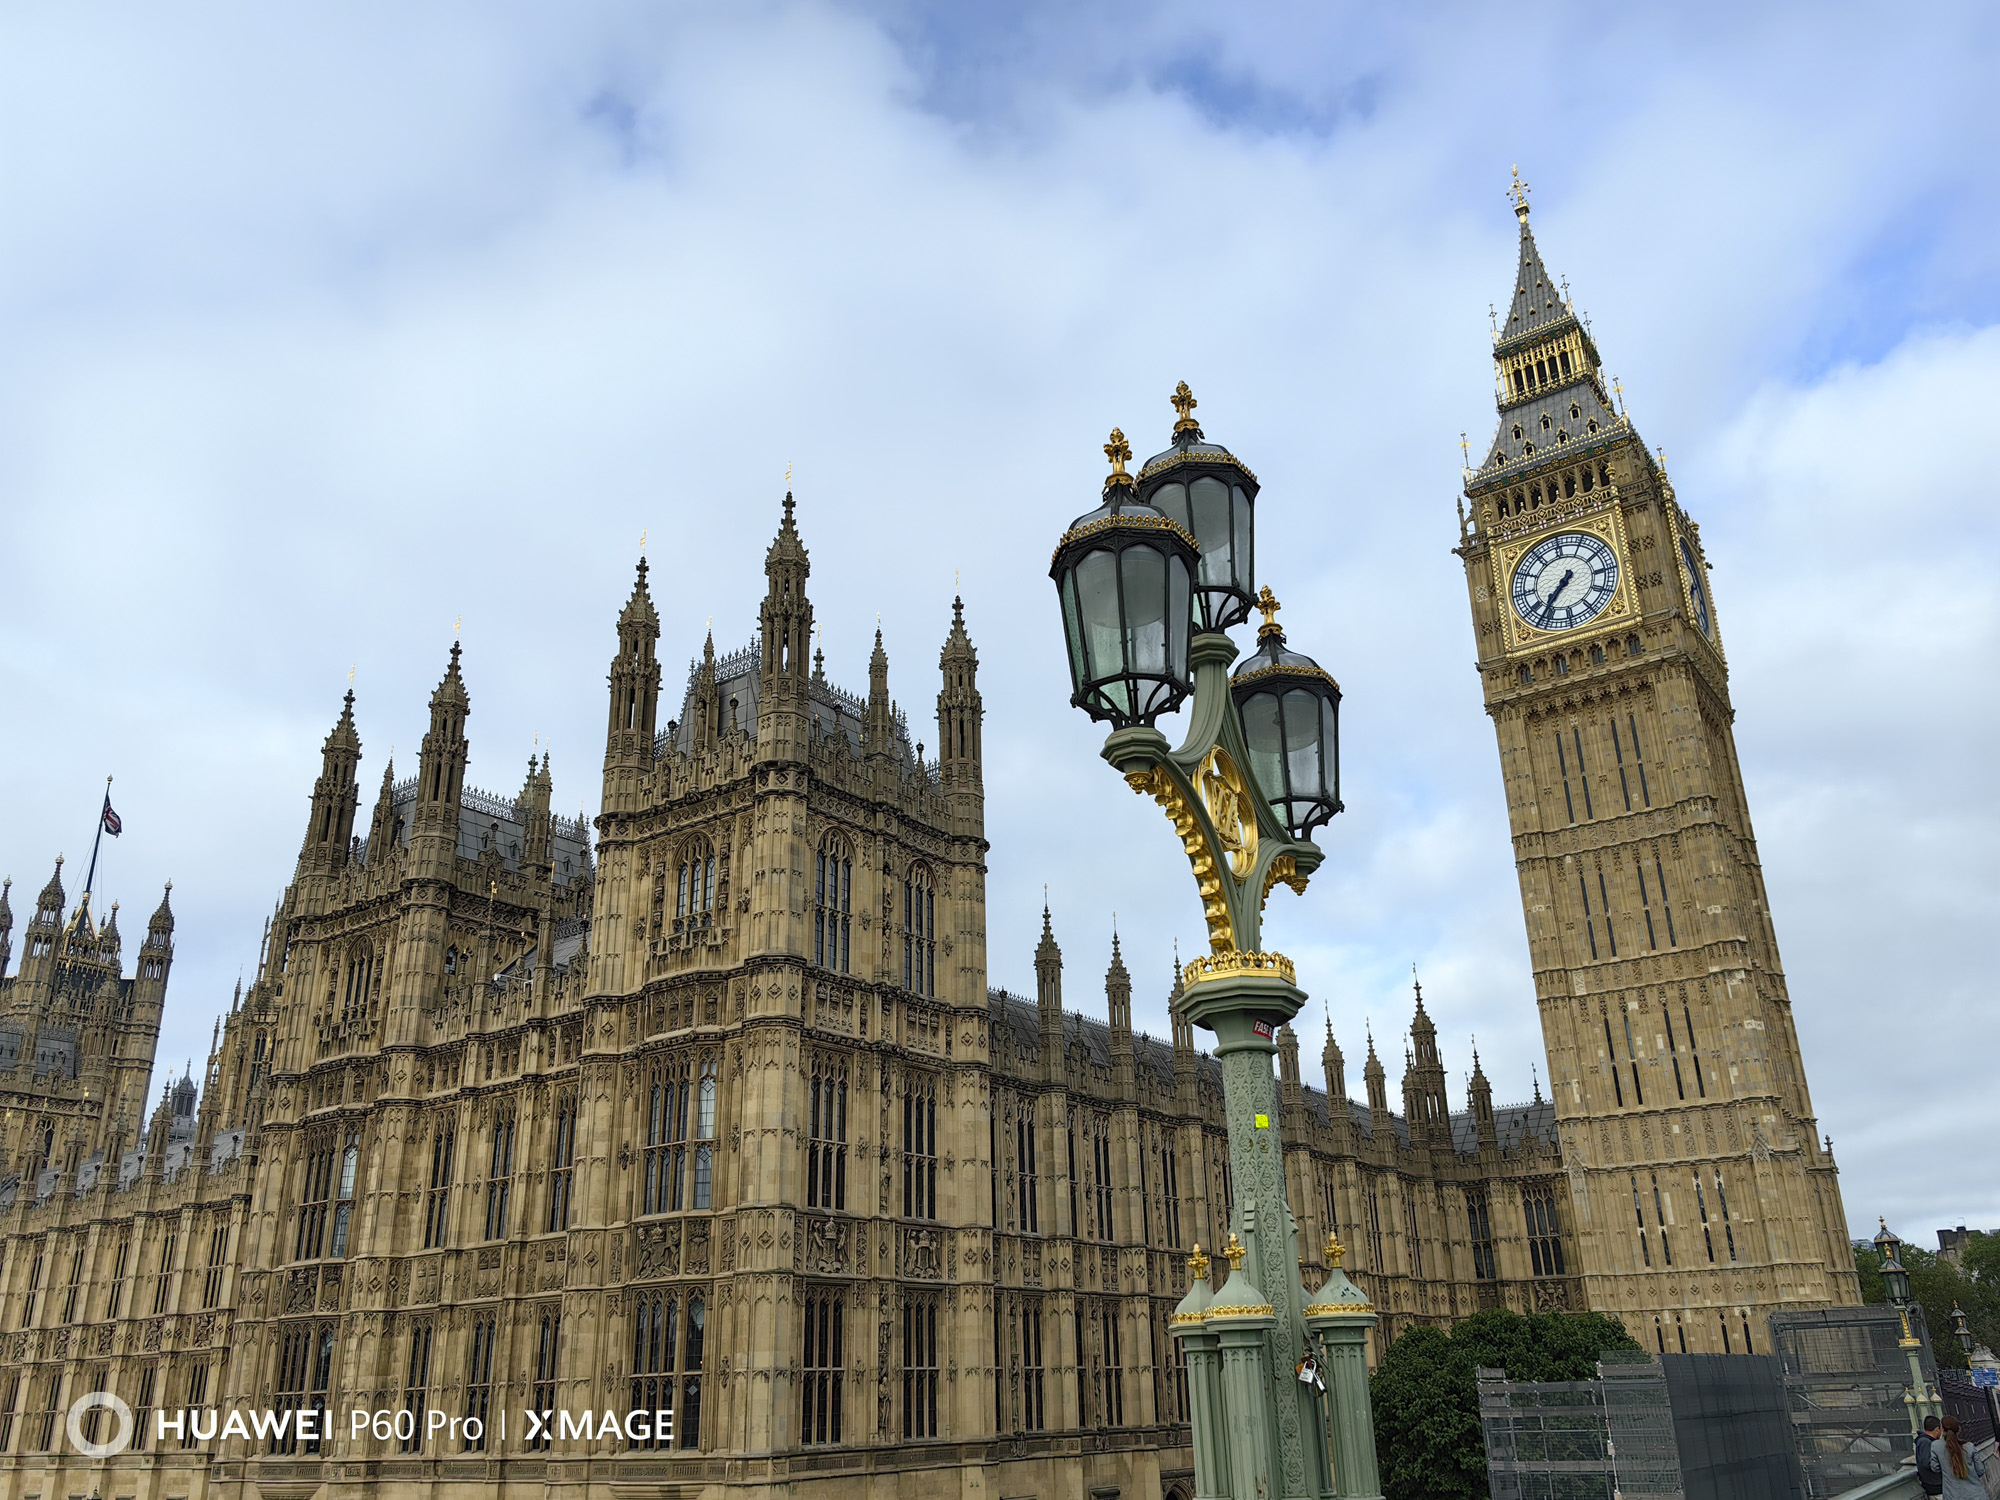 Wideangle photo of Big Ben in London on a bright day